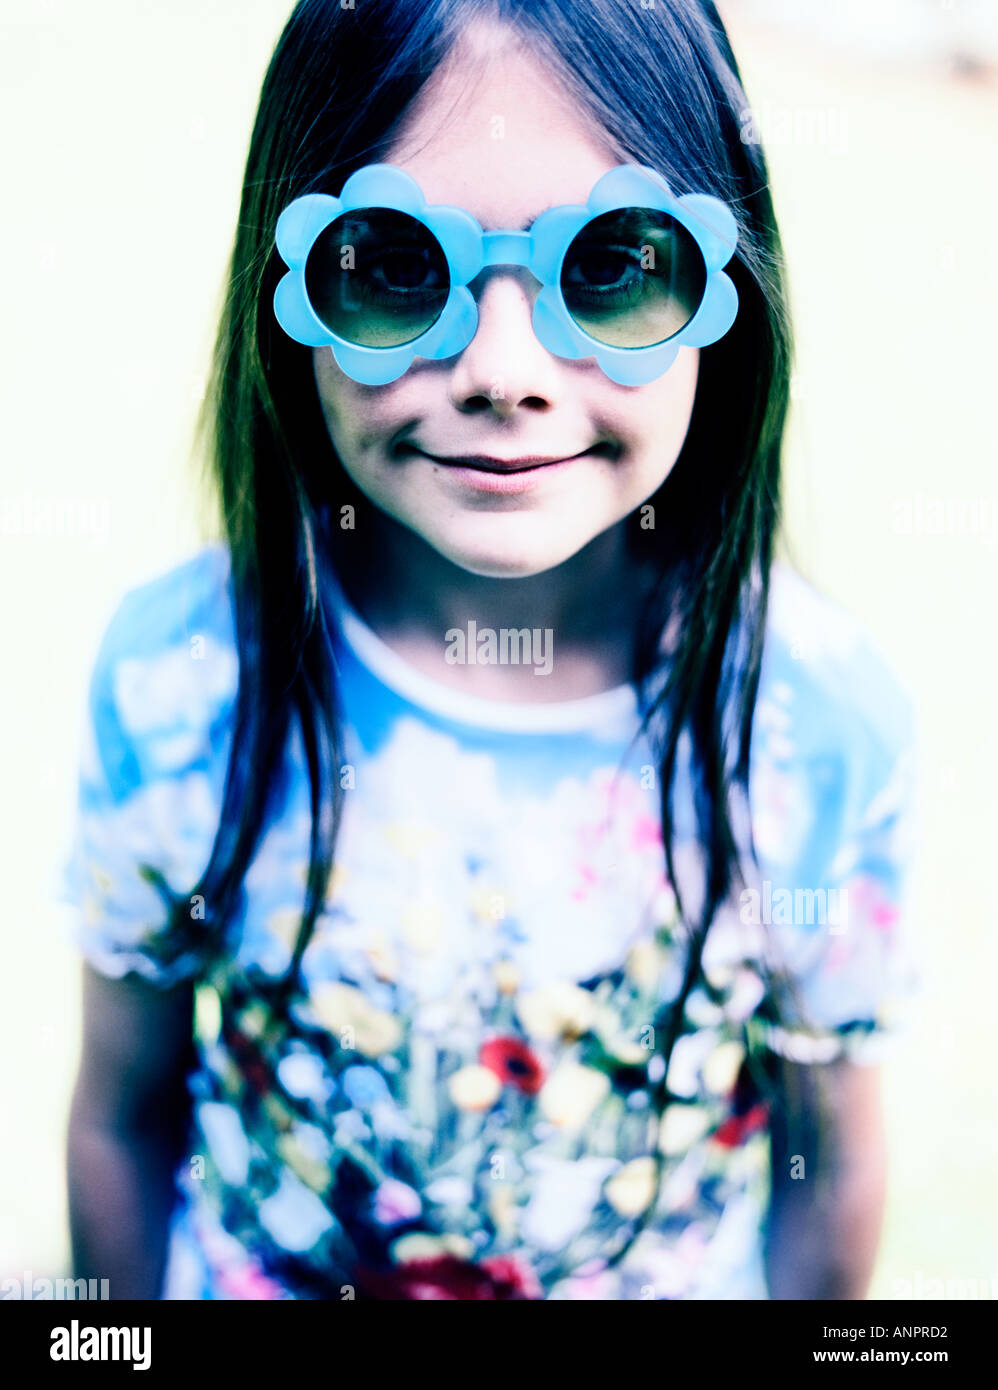 A young girl wearing blue flower sunglasses Stock Photo